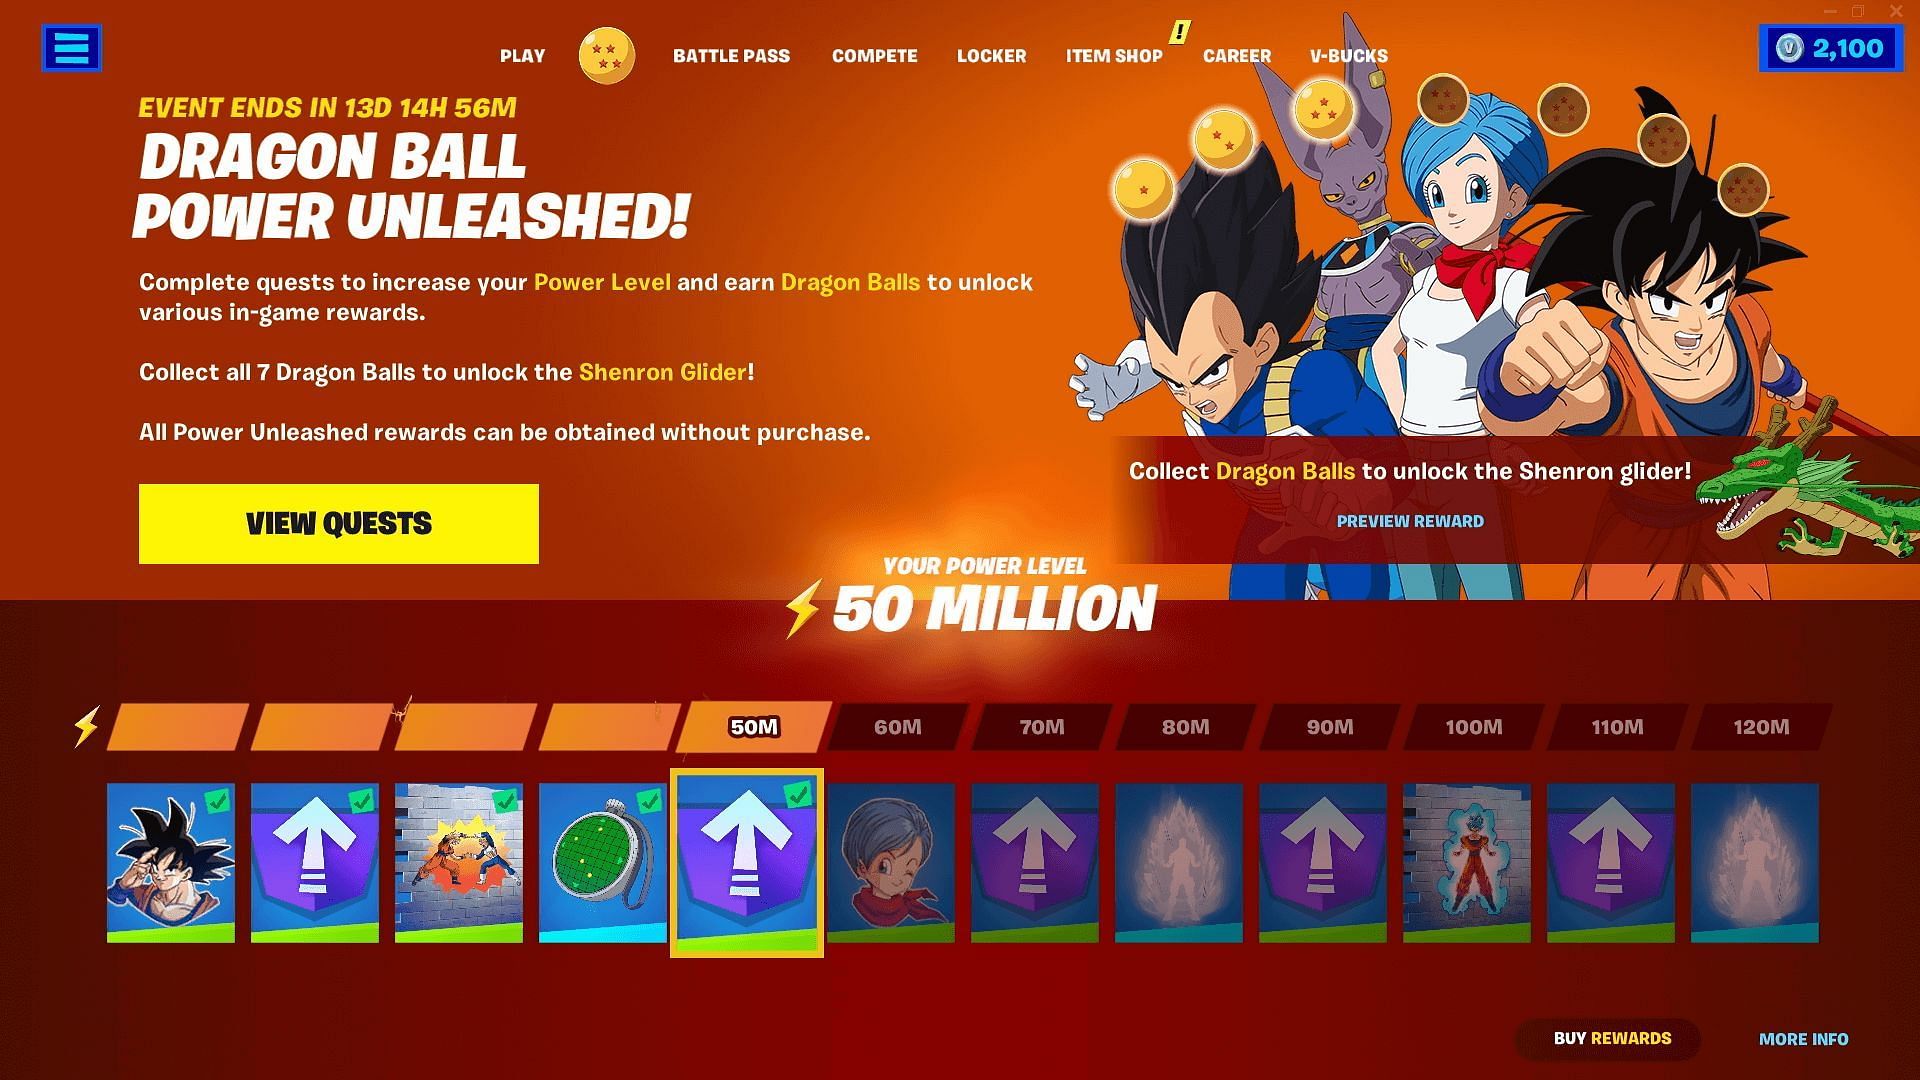 Fortnite x Dragon Ball Super Power Unleashed quests (Image via FNBR/Twitter)